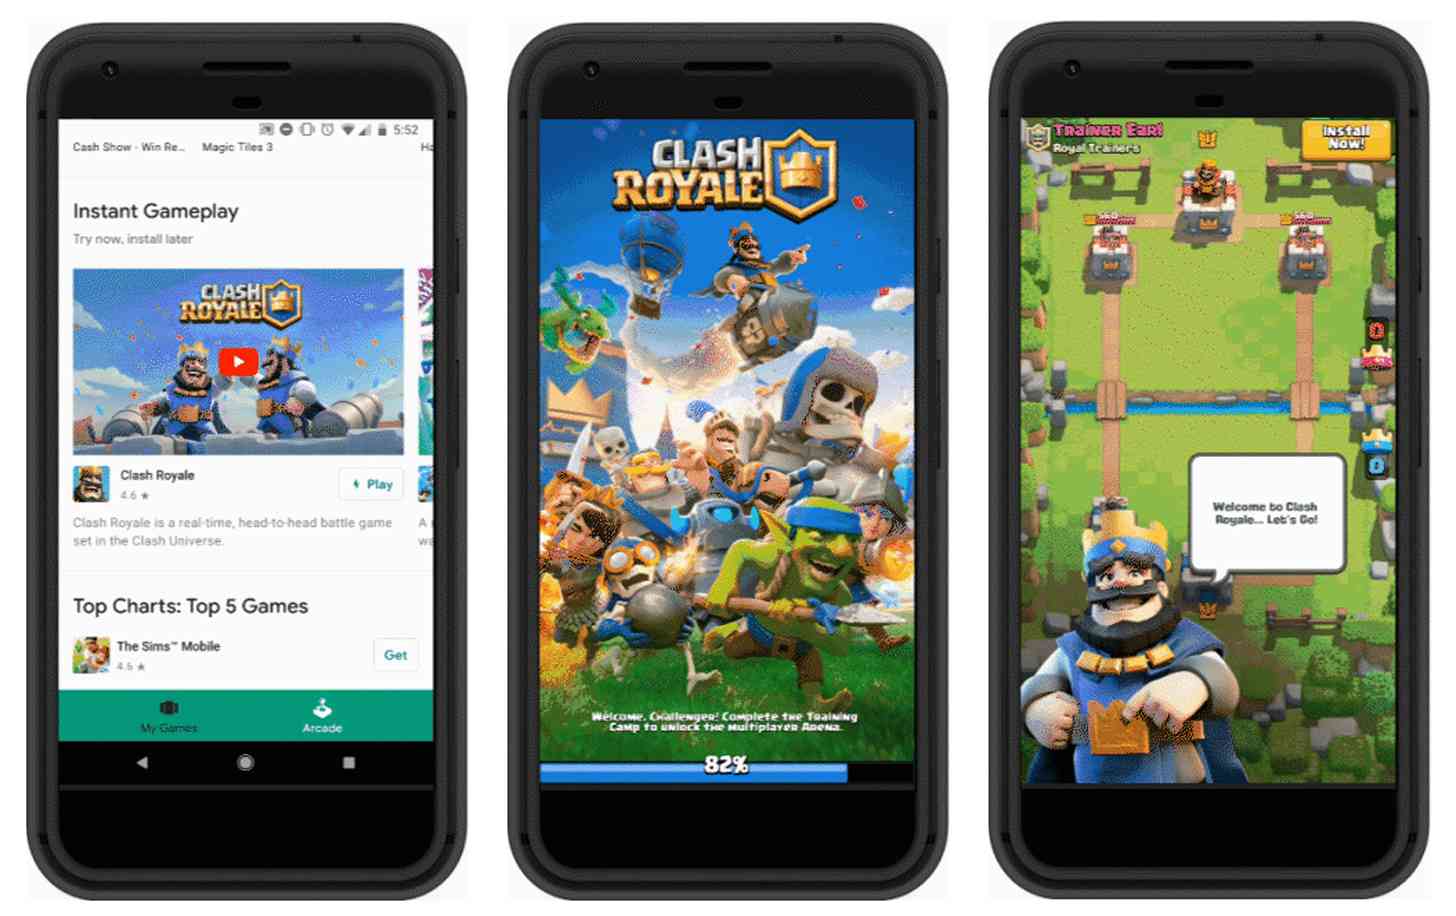 Google Play Instant Android games